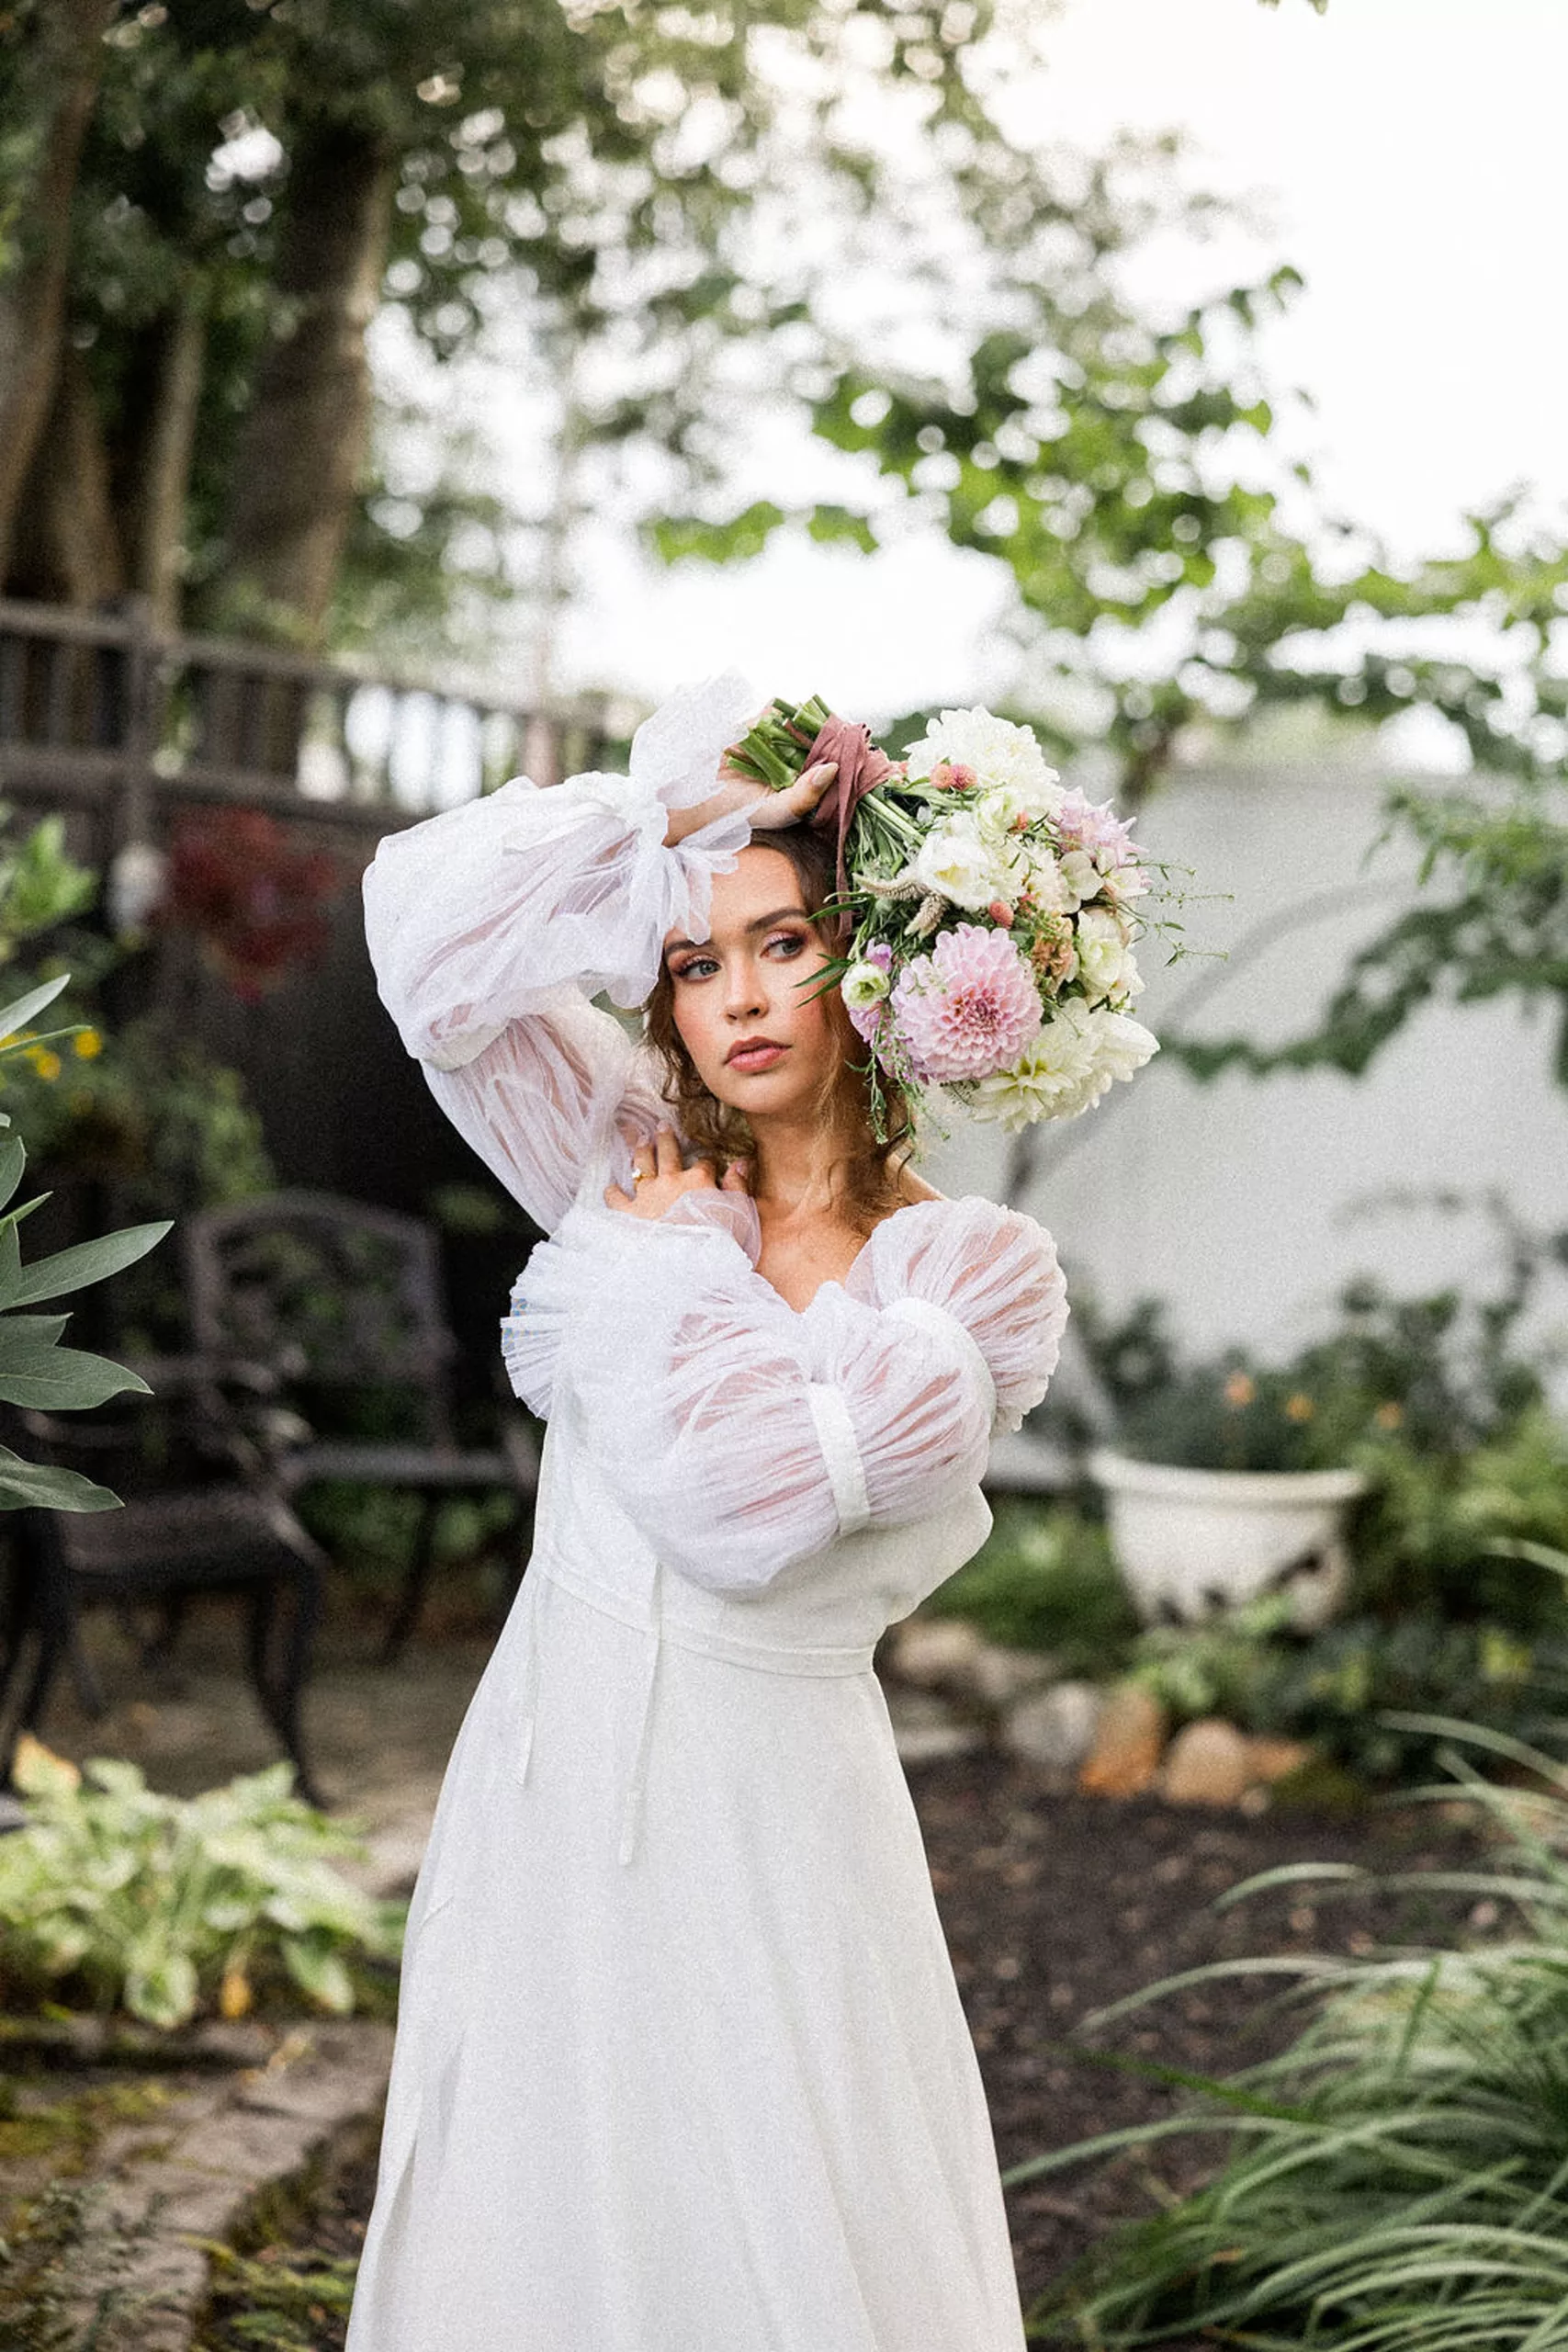 A bride holds her colorful bouquet over her head in a white dress while standing in a garden path